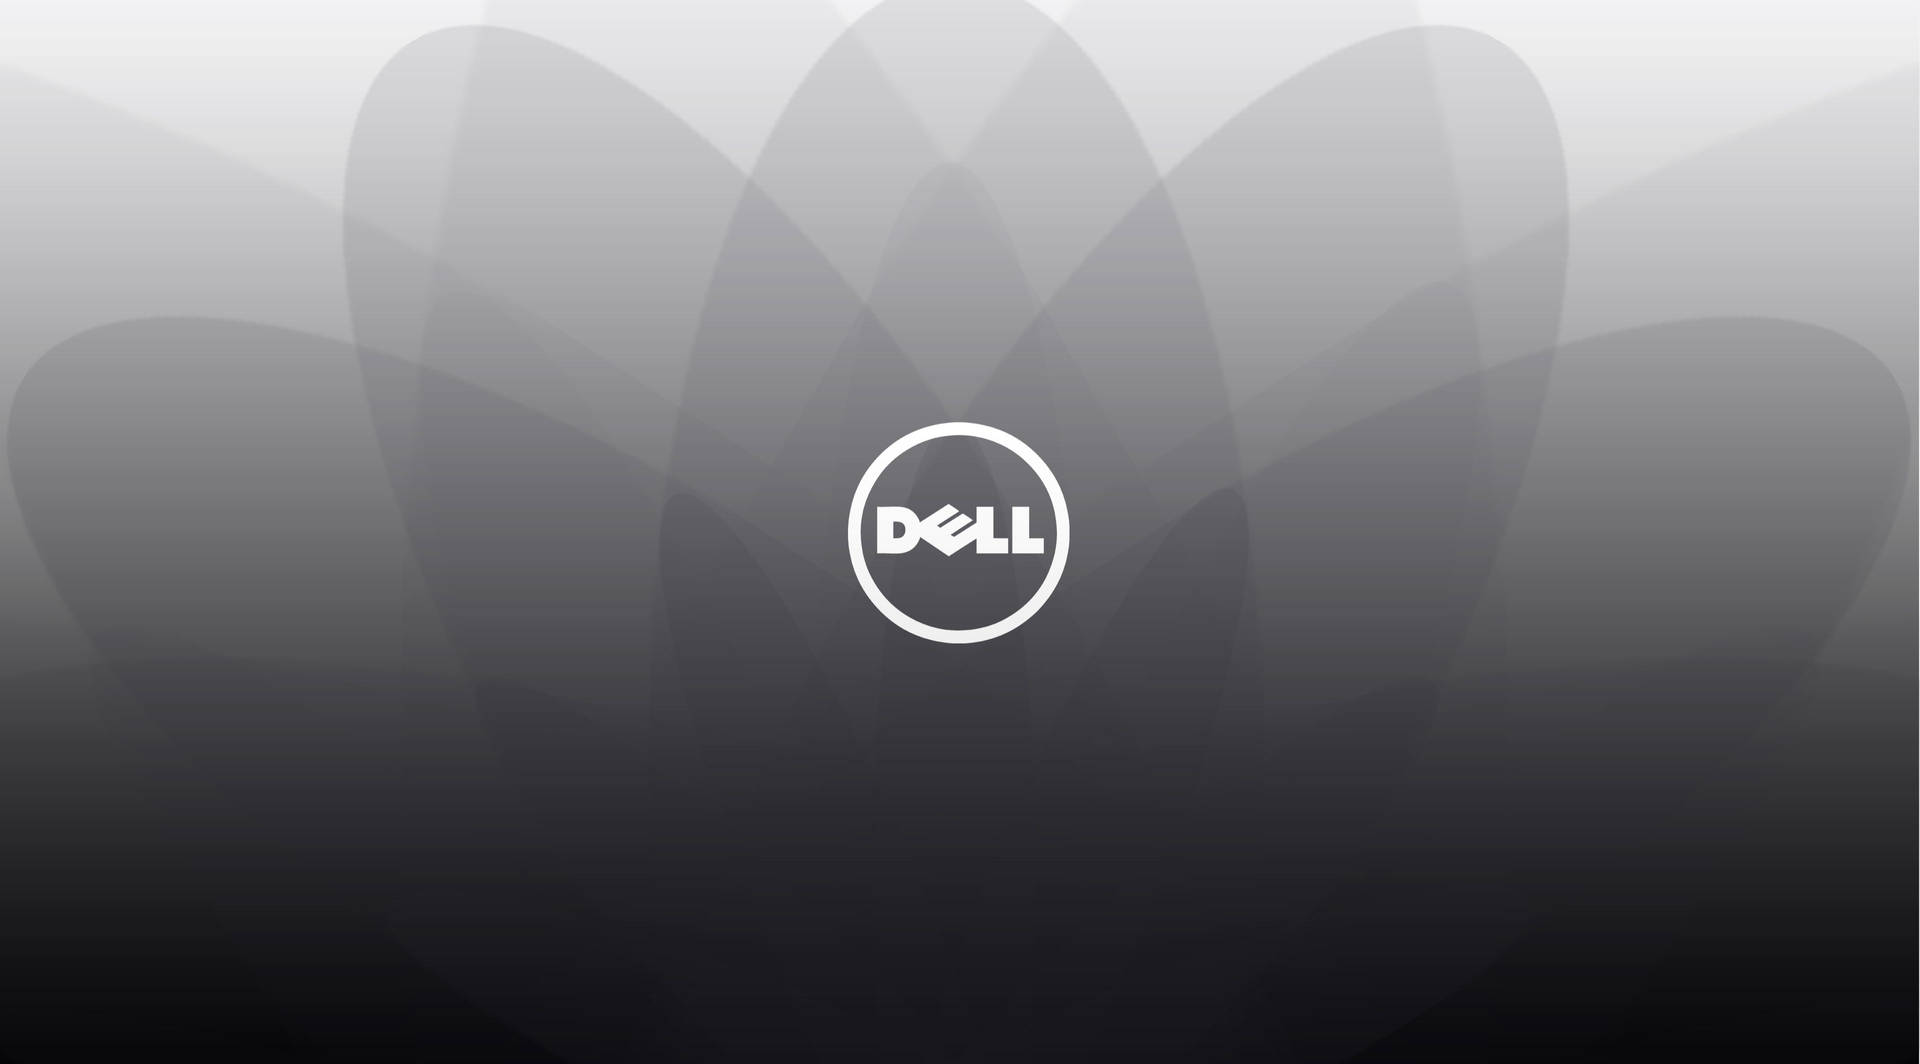 Free Dell Wallpaper Downloads, [100+] Dell Wallpapers for FREE | Wallpapers .com